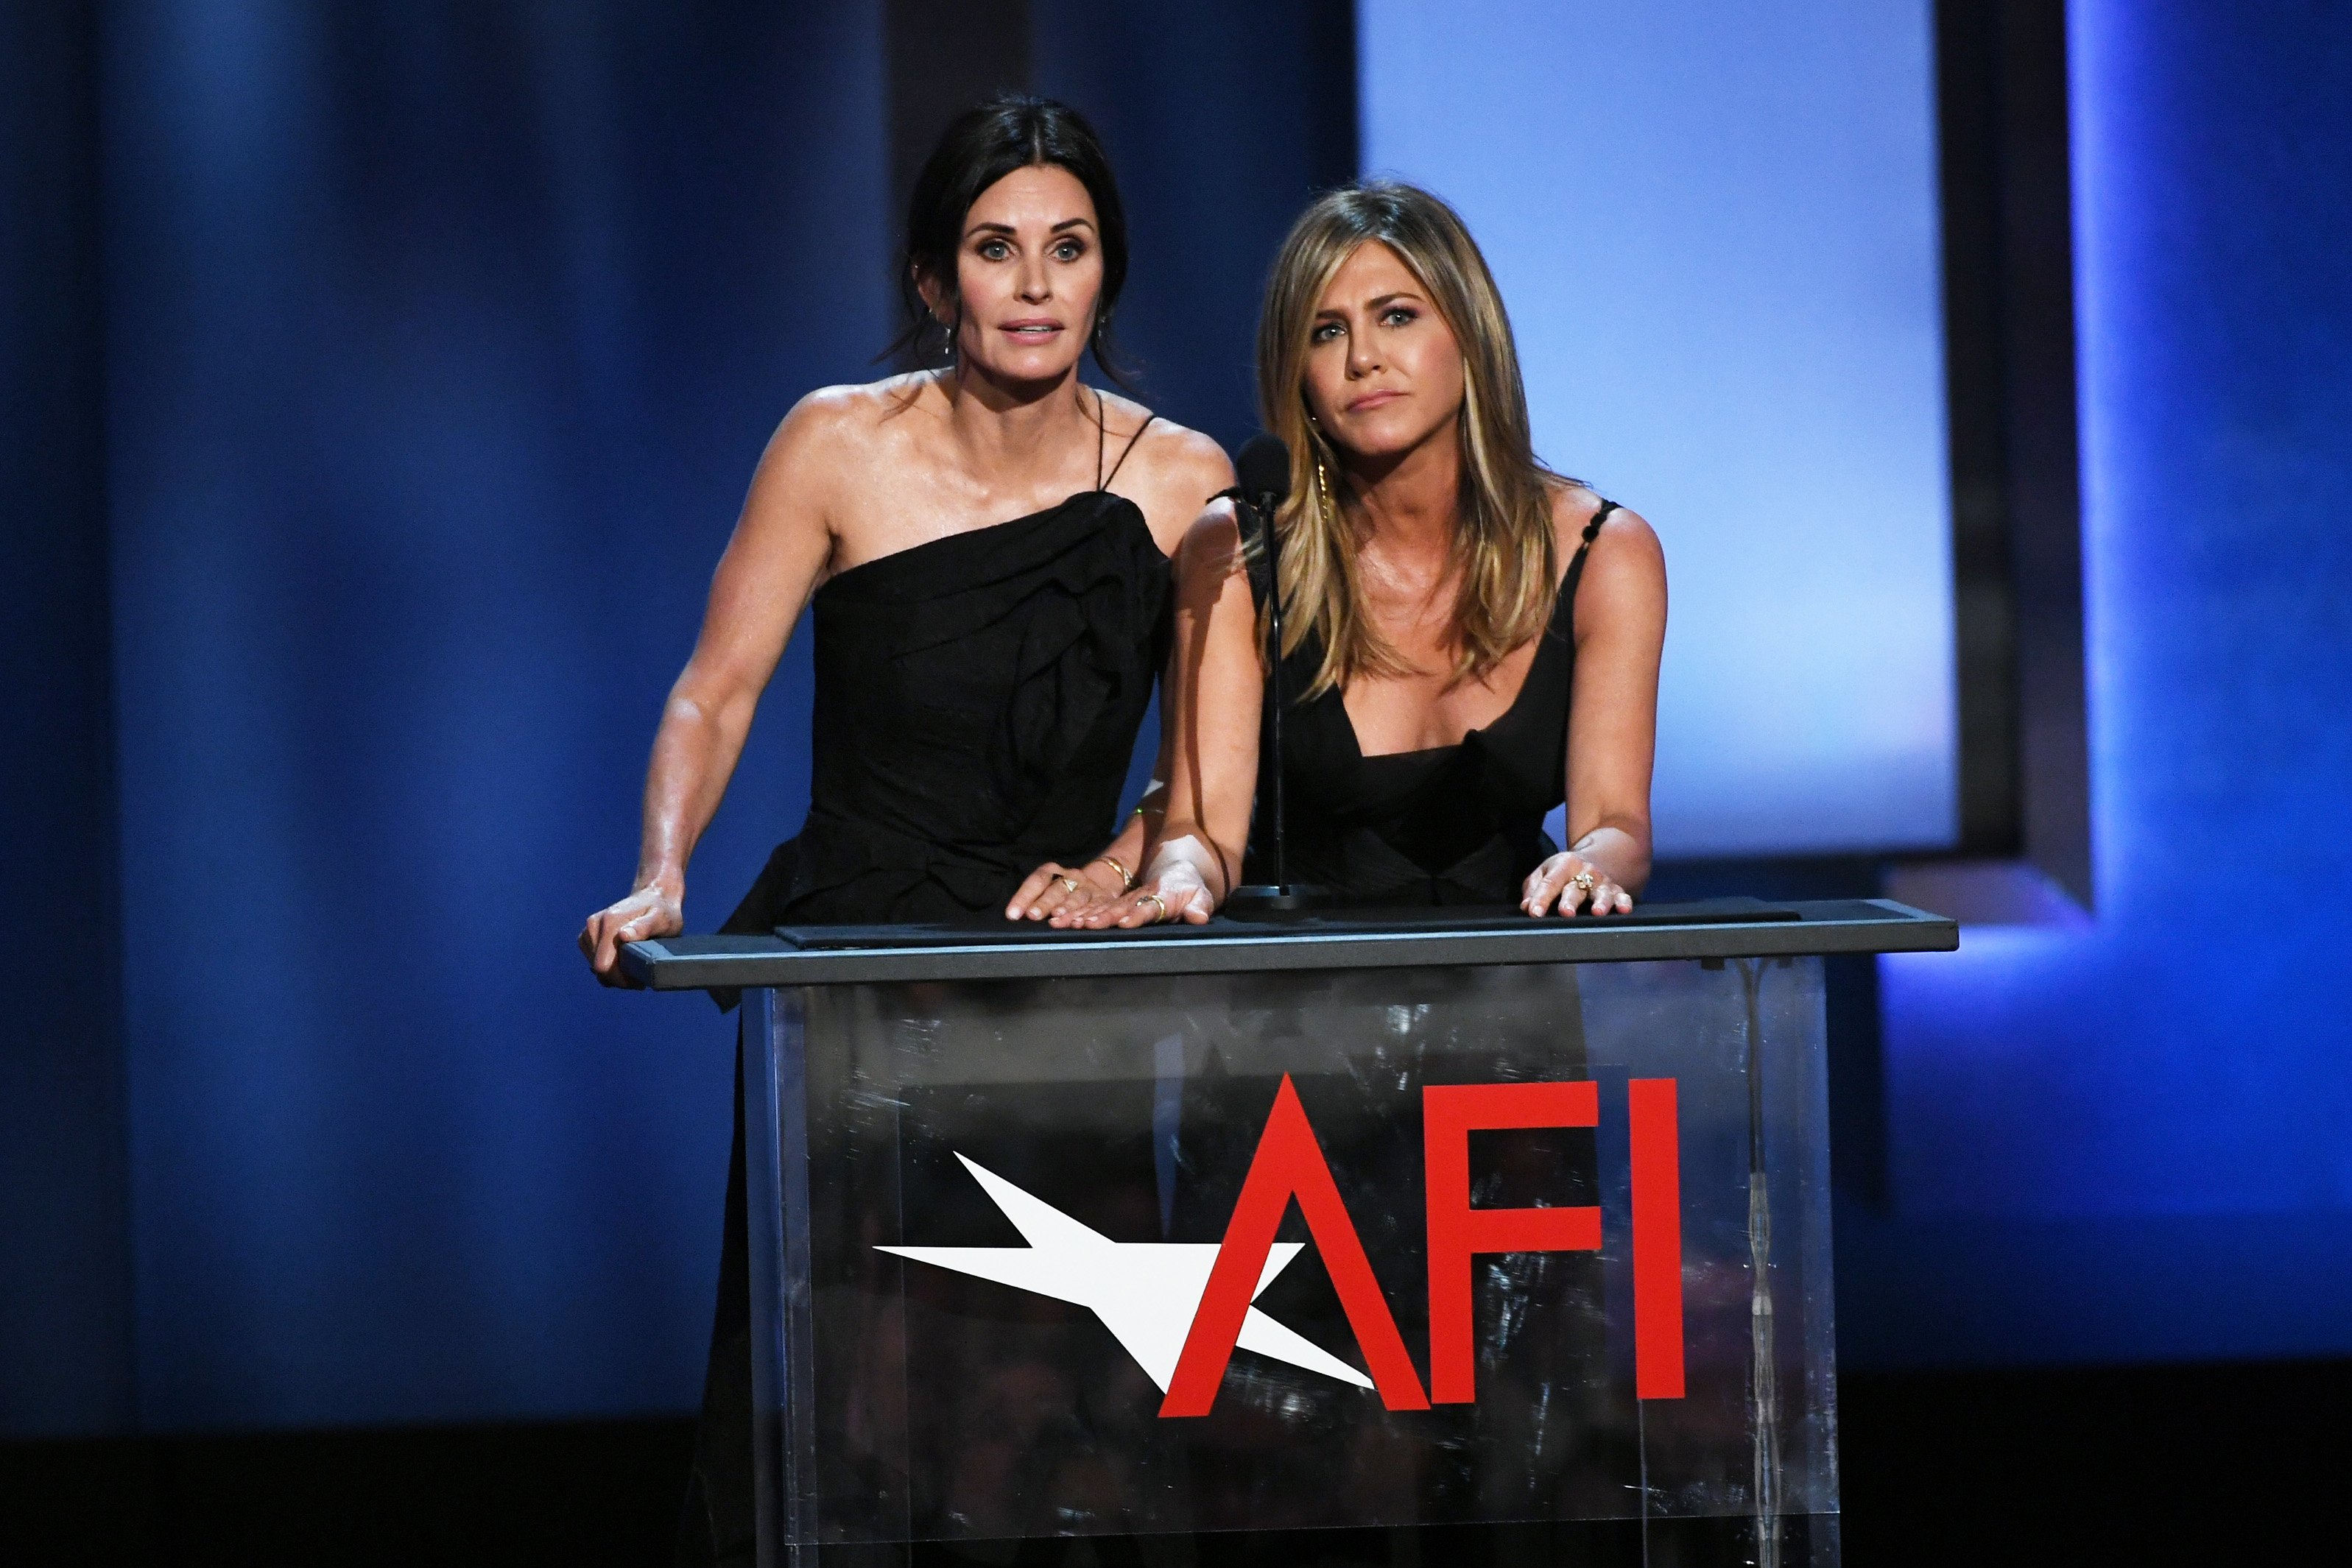 Courteney Cox (L) and Jennifer Aniston speak onstage during the American Film Institute's 46th Life Achievement Award Gala Tribute to George Clooney at Dolby Theatre on June 7, 2018 in Hollywood, California. | Source: Getty Images